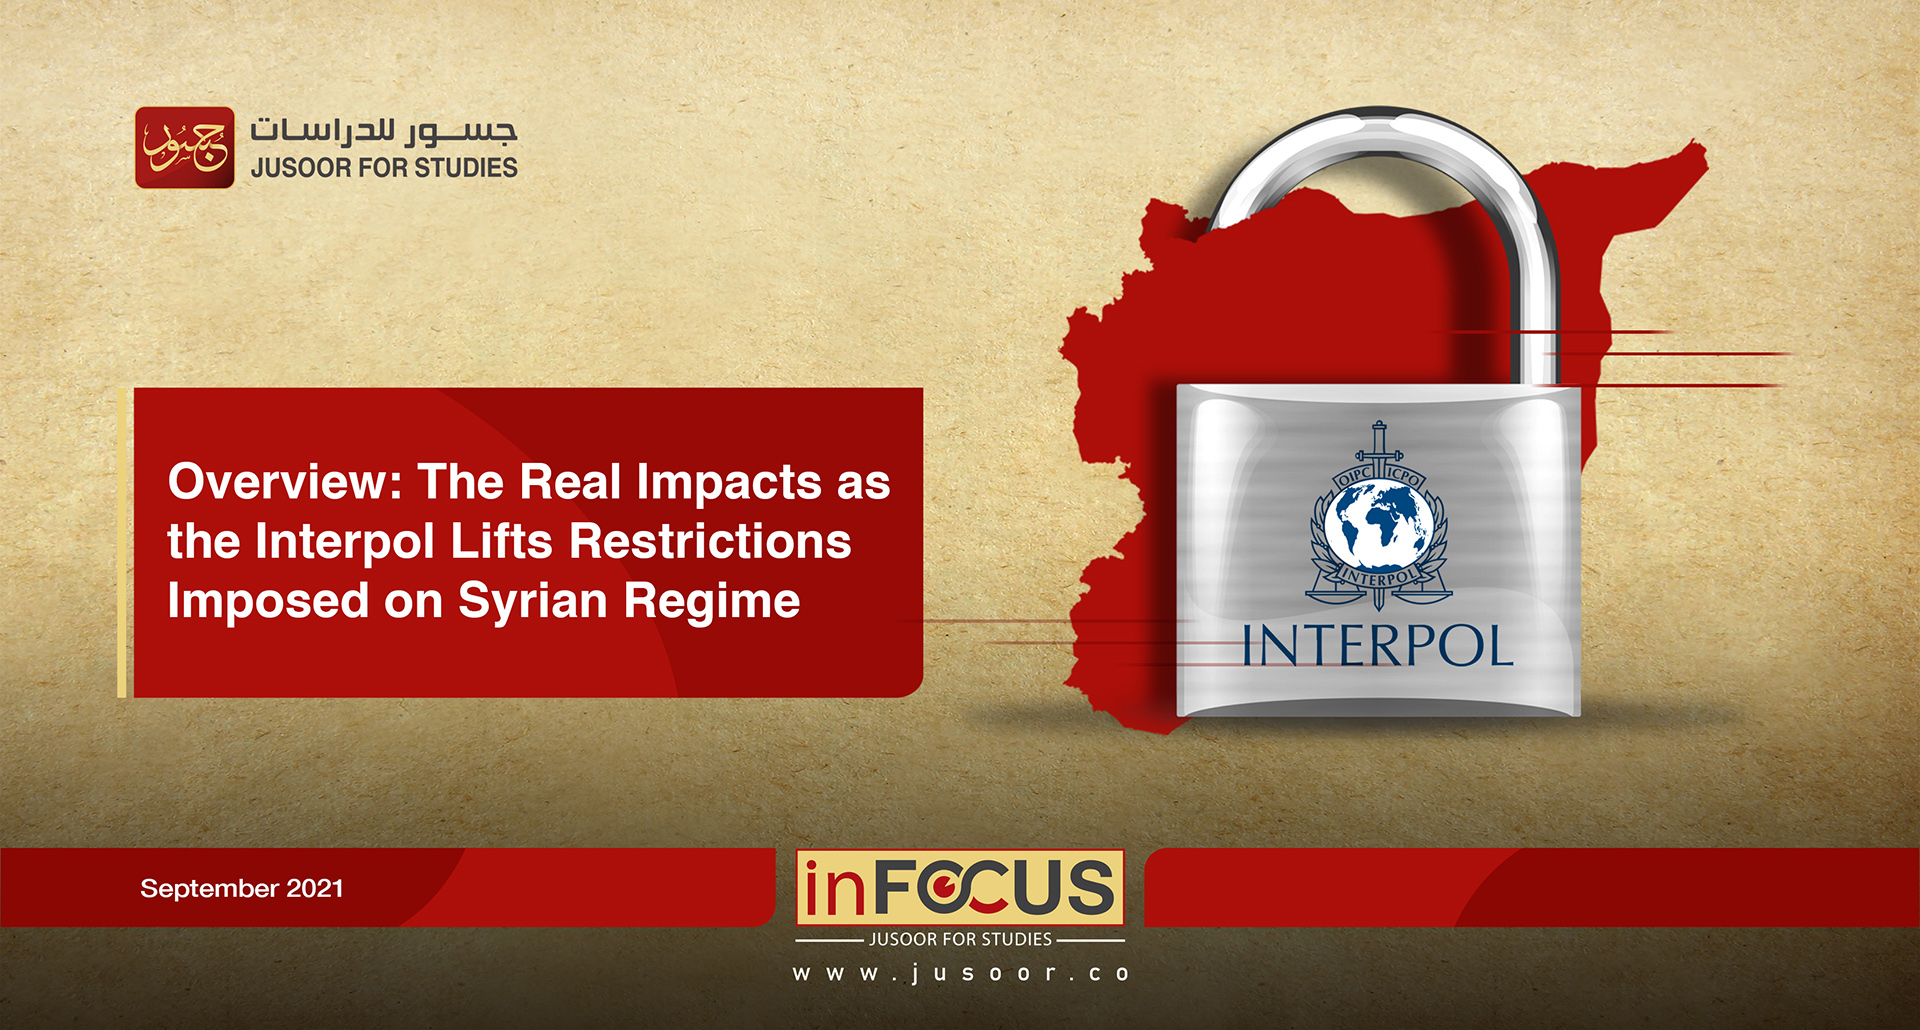 Overview: The Real Impacts as the Interpol Lifts Restrictions Imposed on Syrian Regime